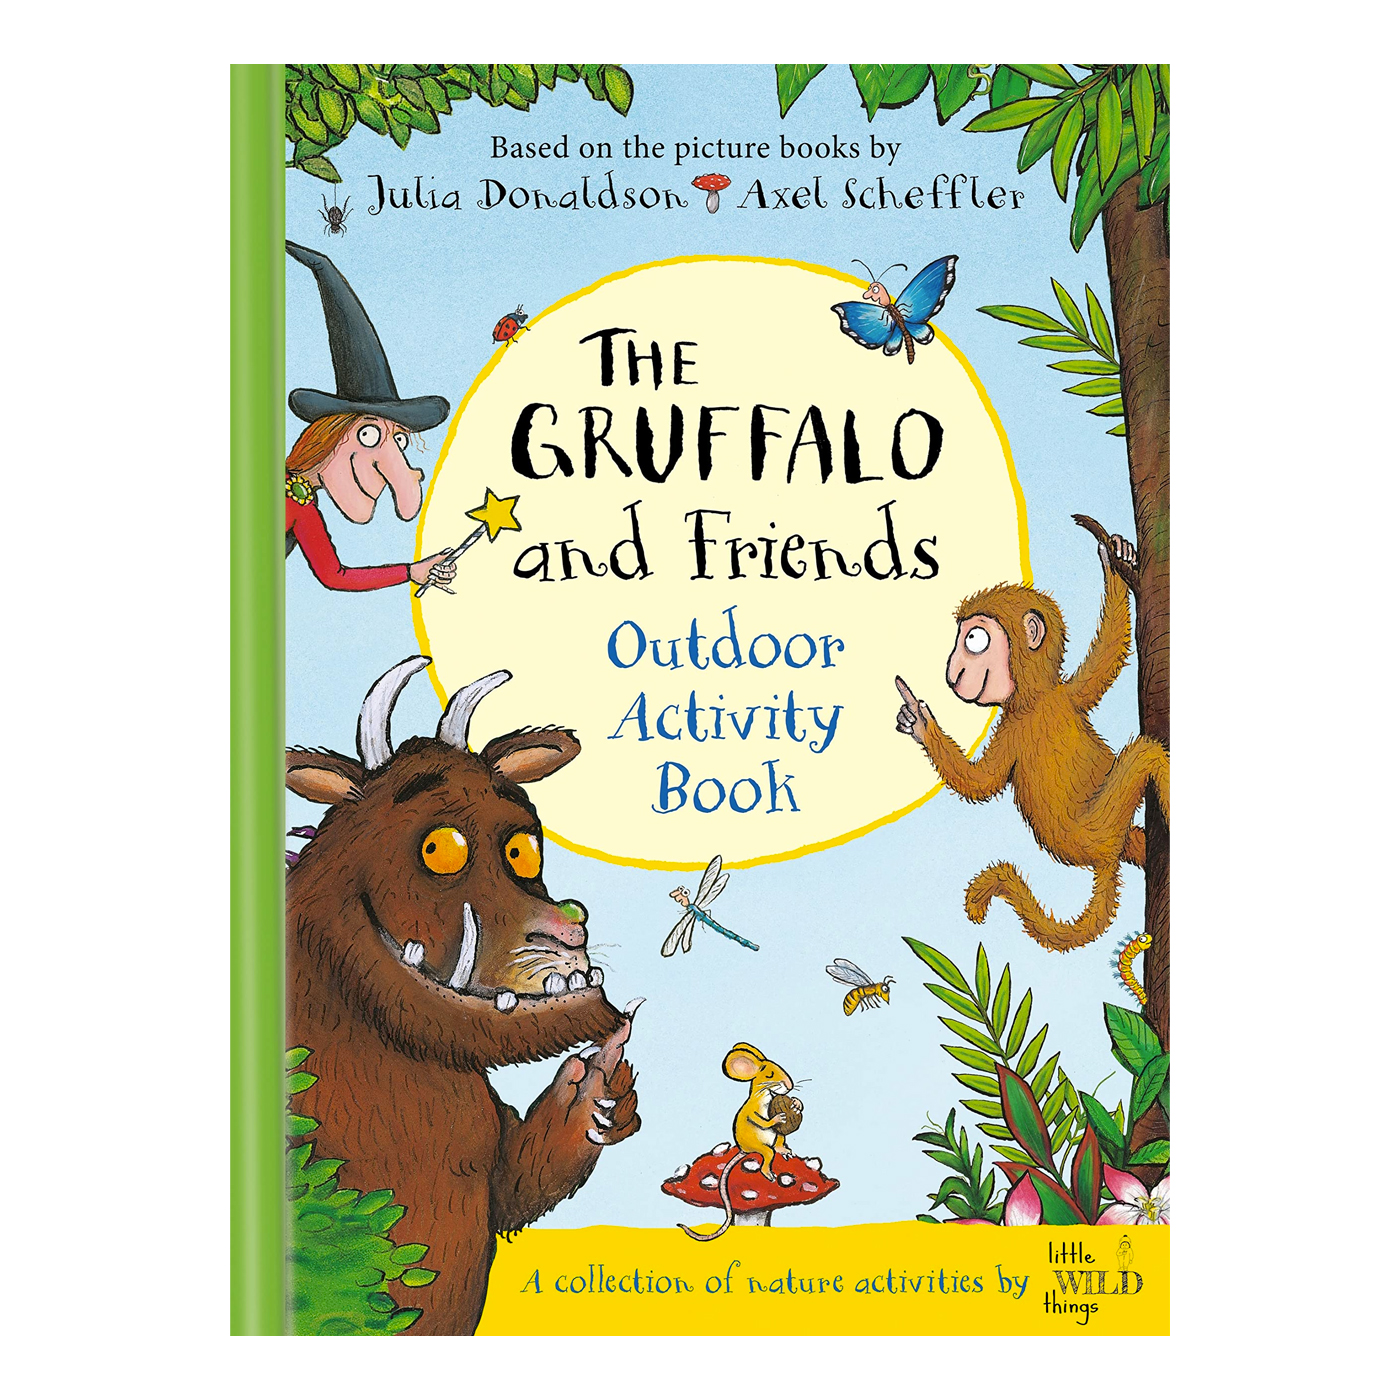  The Gruffalo and Friends Outdoor Activity Book